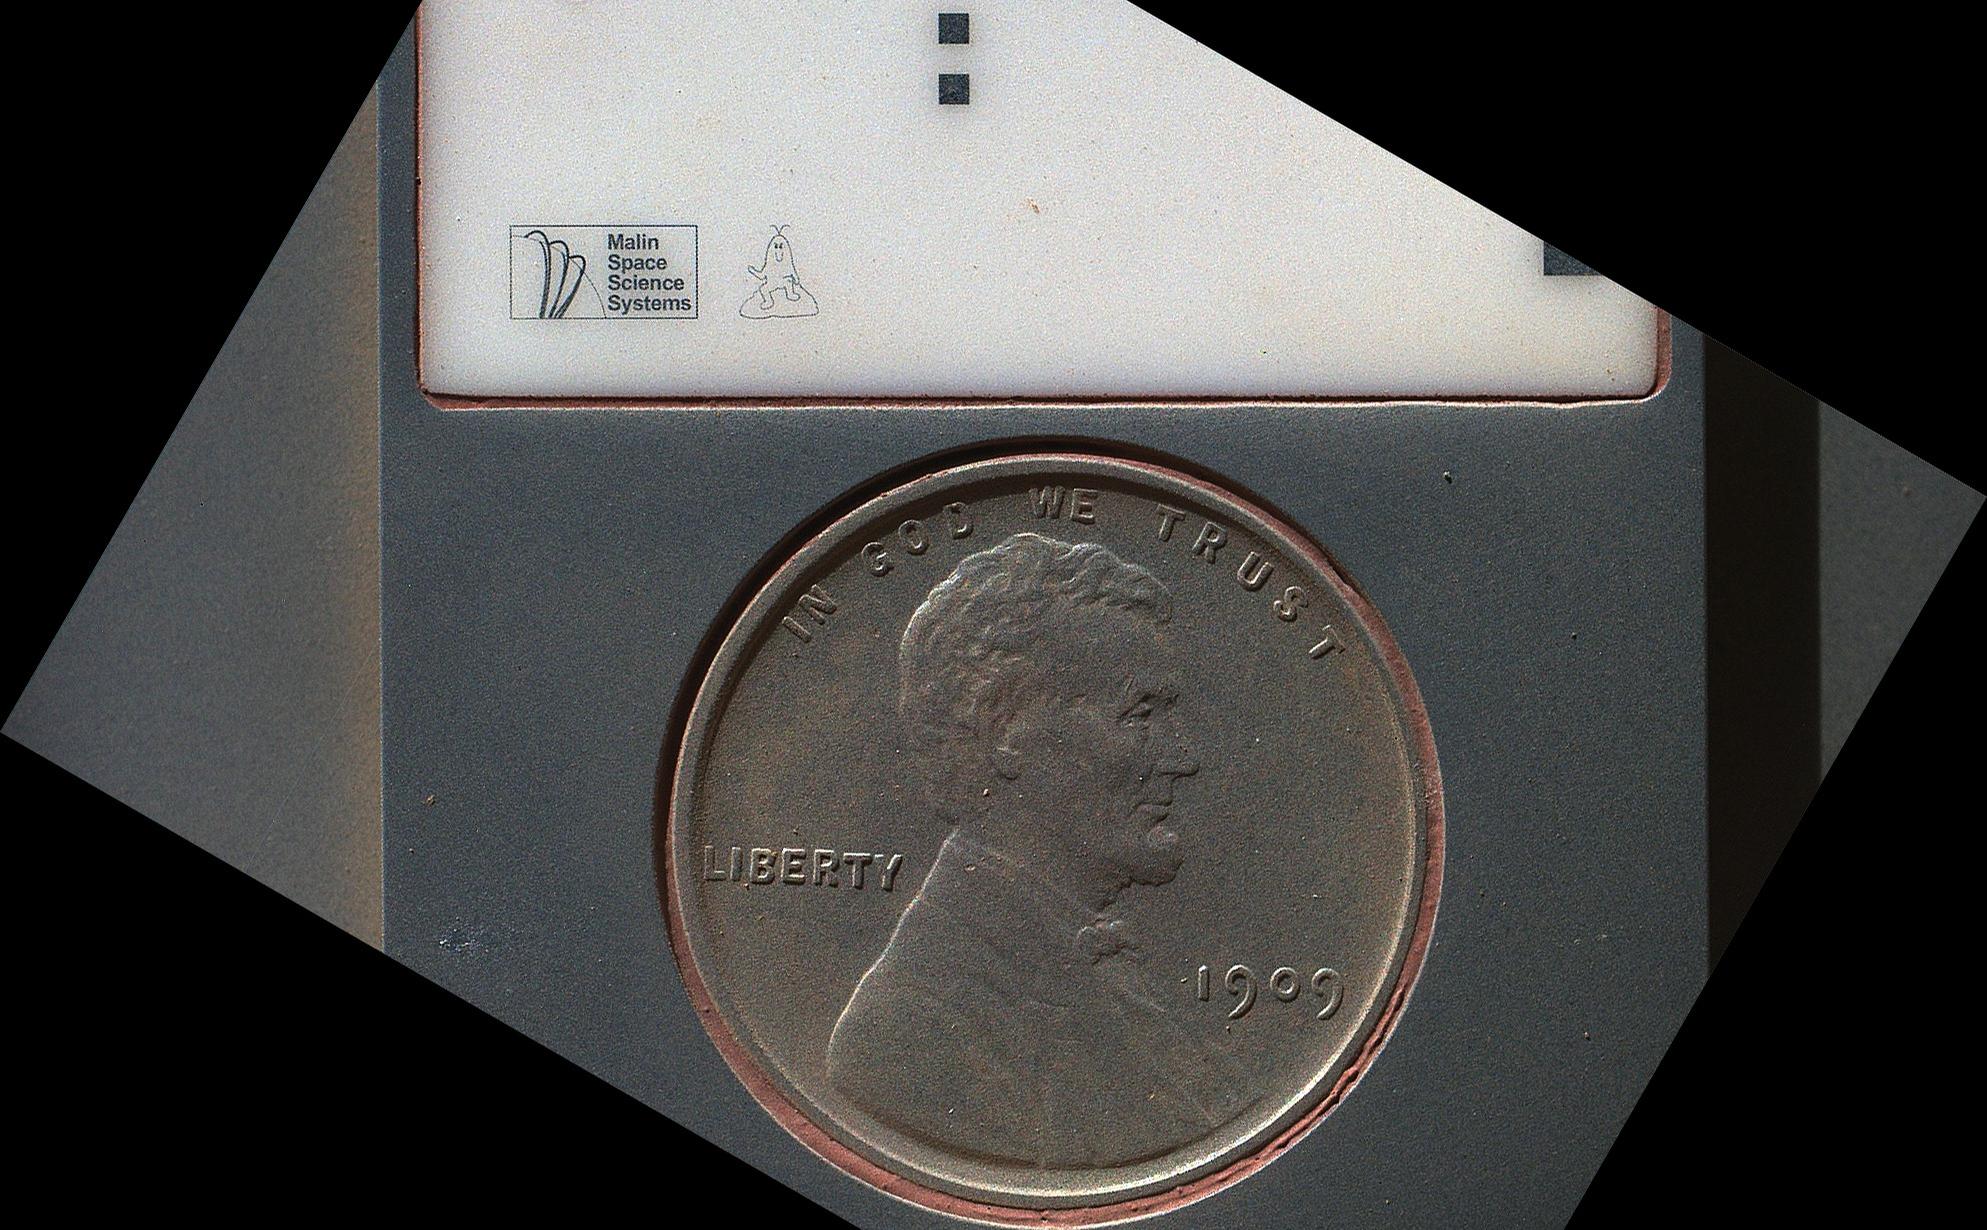 The penny in this image is part of a camera calibration target on NASA's Mars rover Curiosity.